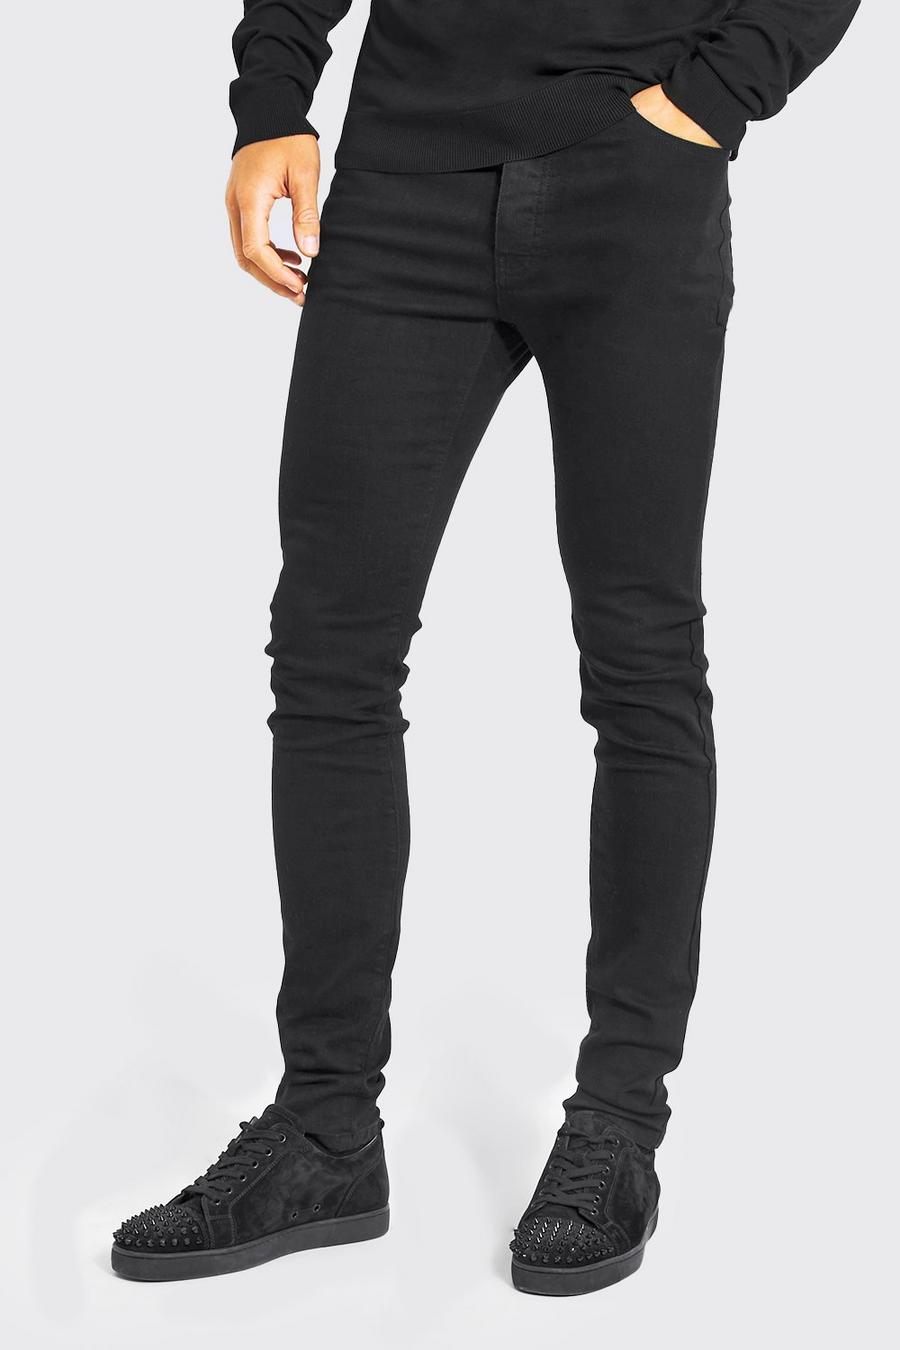 Jeans Tall Skinny Fit in cotone riciclato, True black image number 1